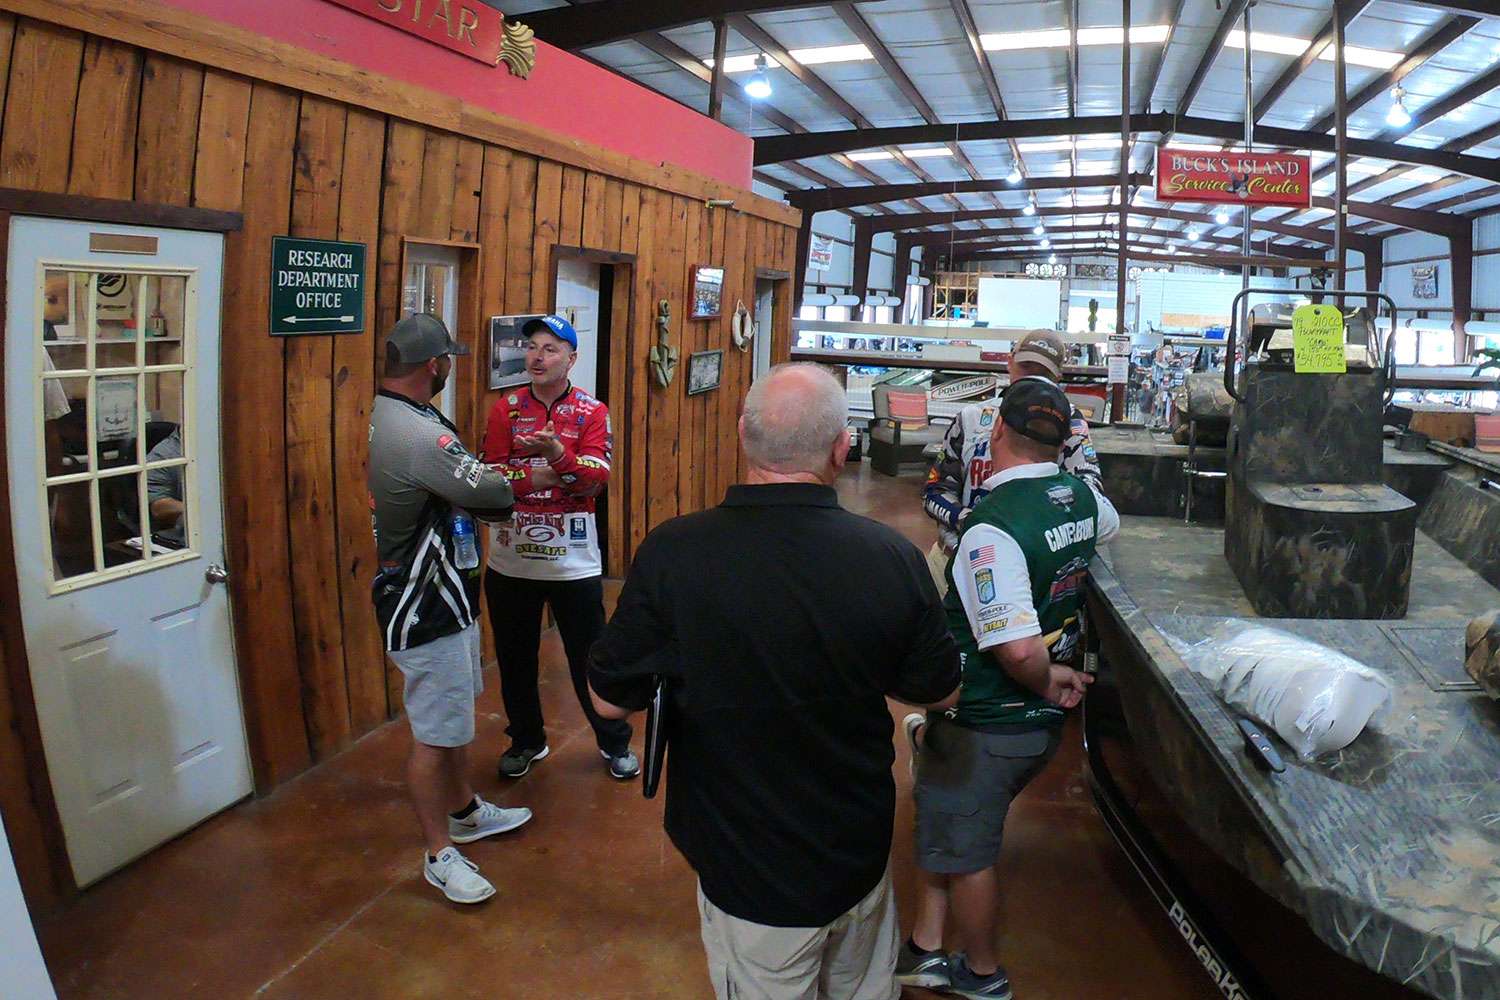 With the 2019 Academy Sports + Outdoors Bassmaster Elite Series Tournament at Lake Guntersville just around the corner, a group of Elite Series pros met up at Buck's Island Marine in the town of Southside, Ala. 